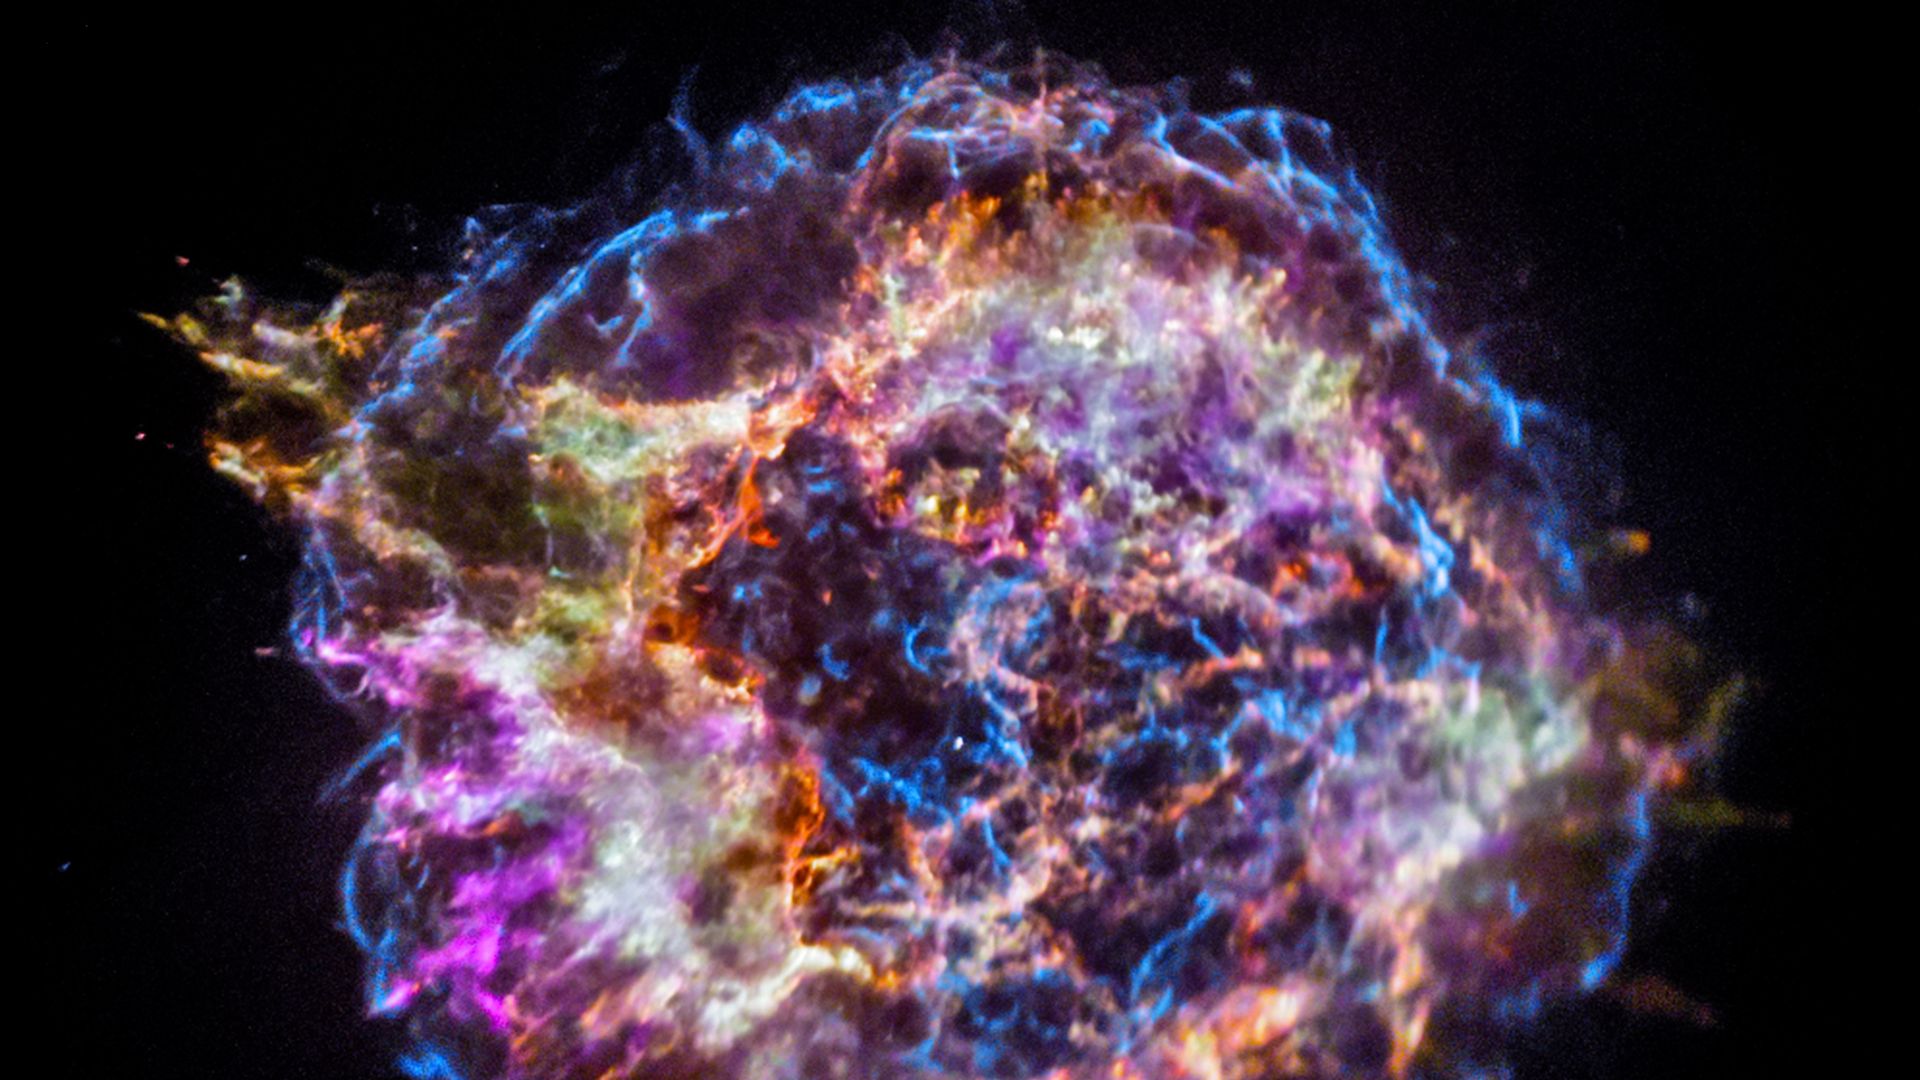 A photo of a supernova explosion in deep space.